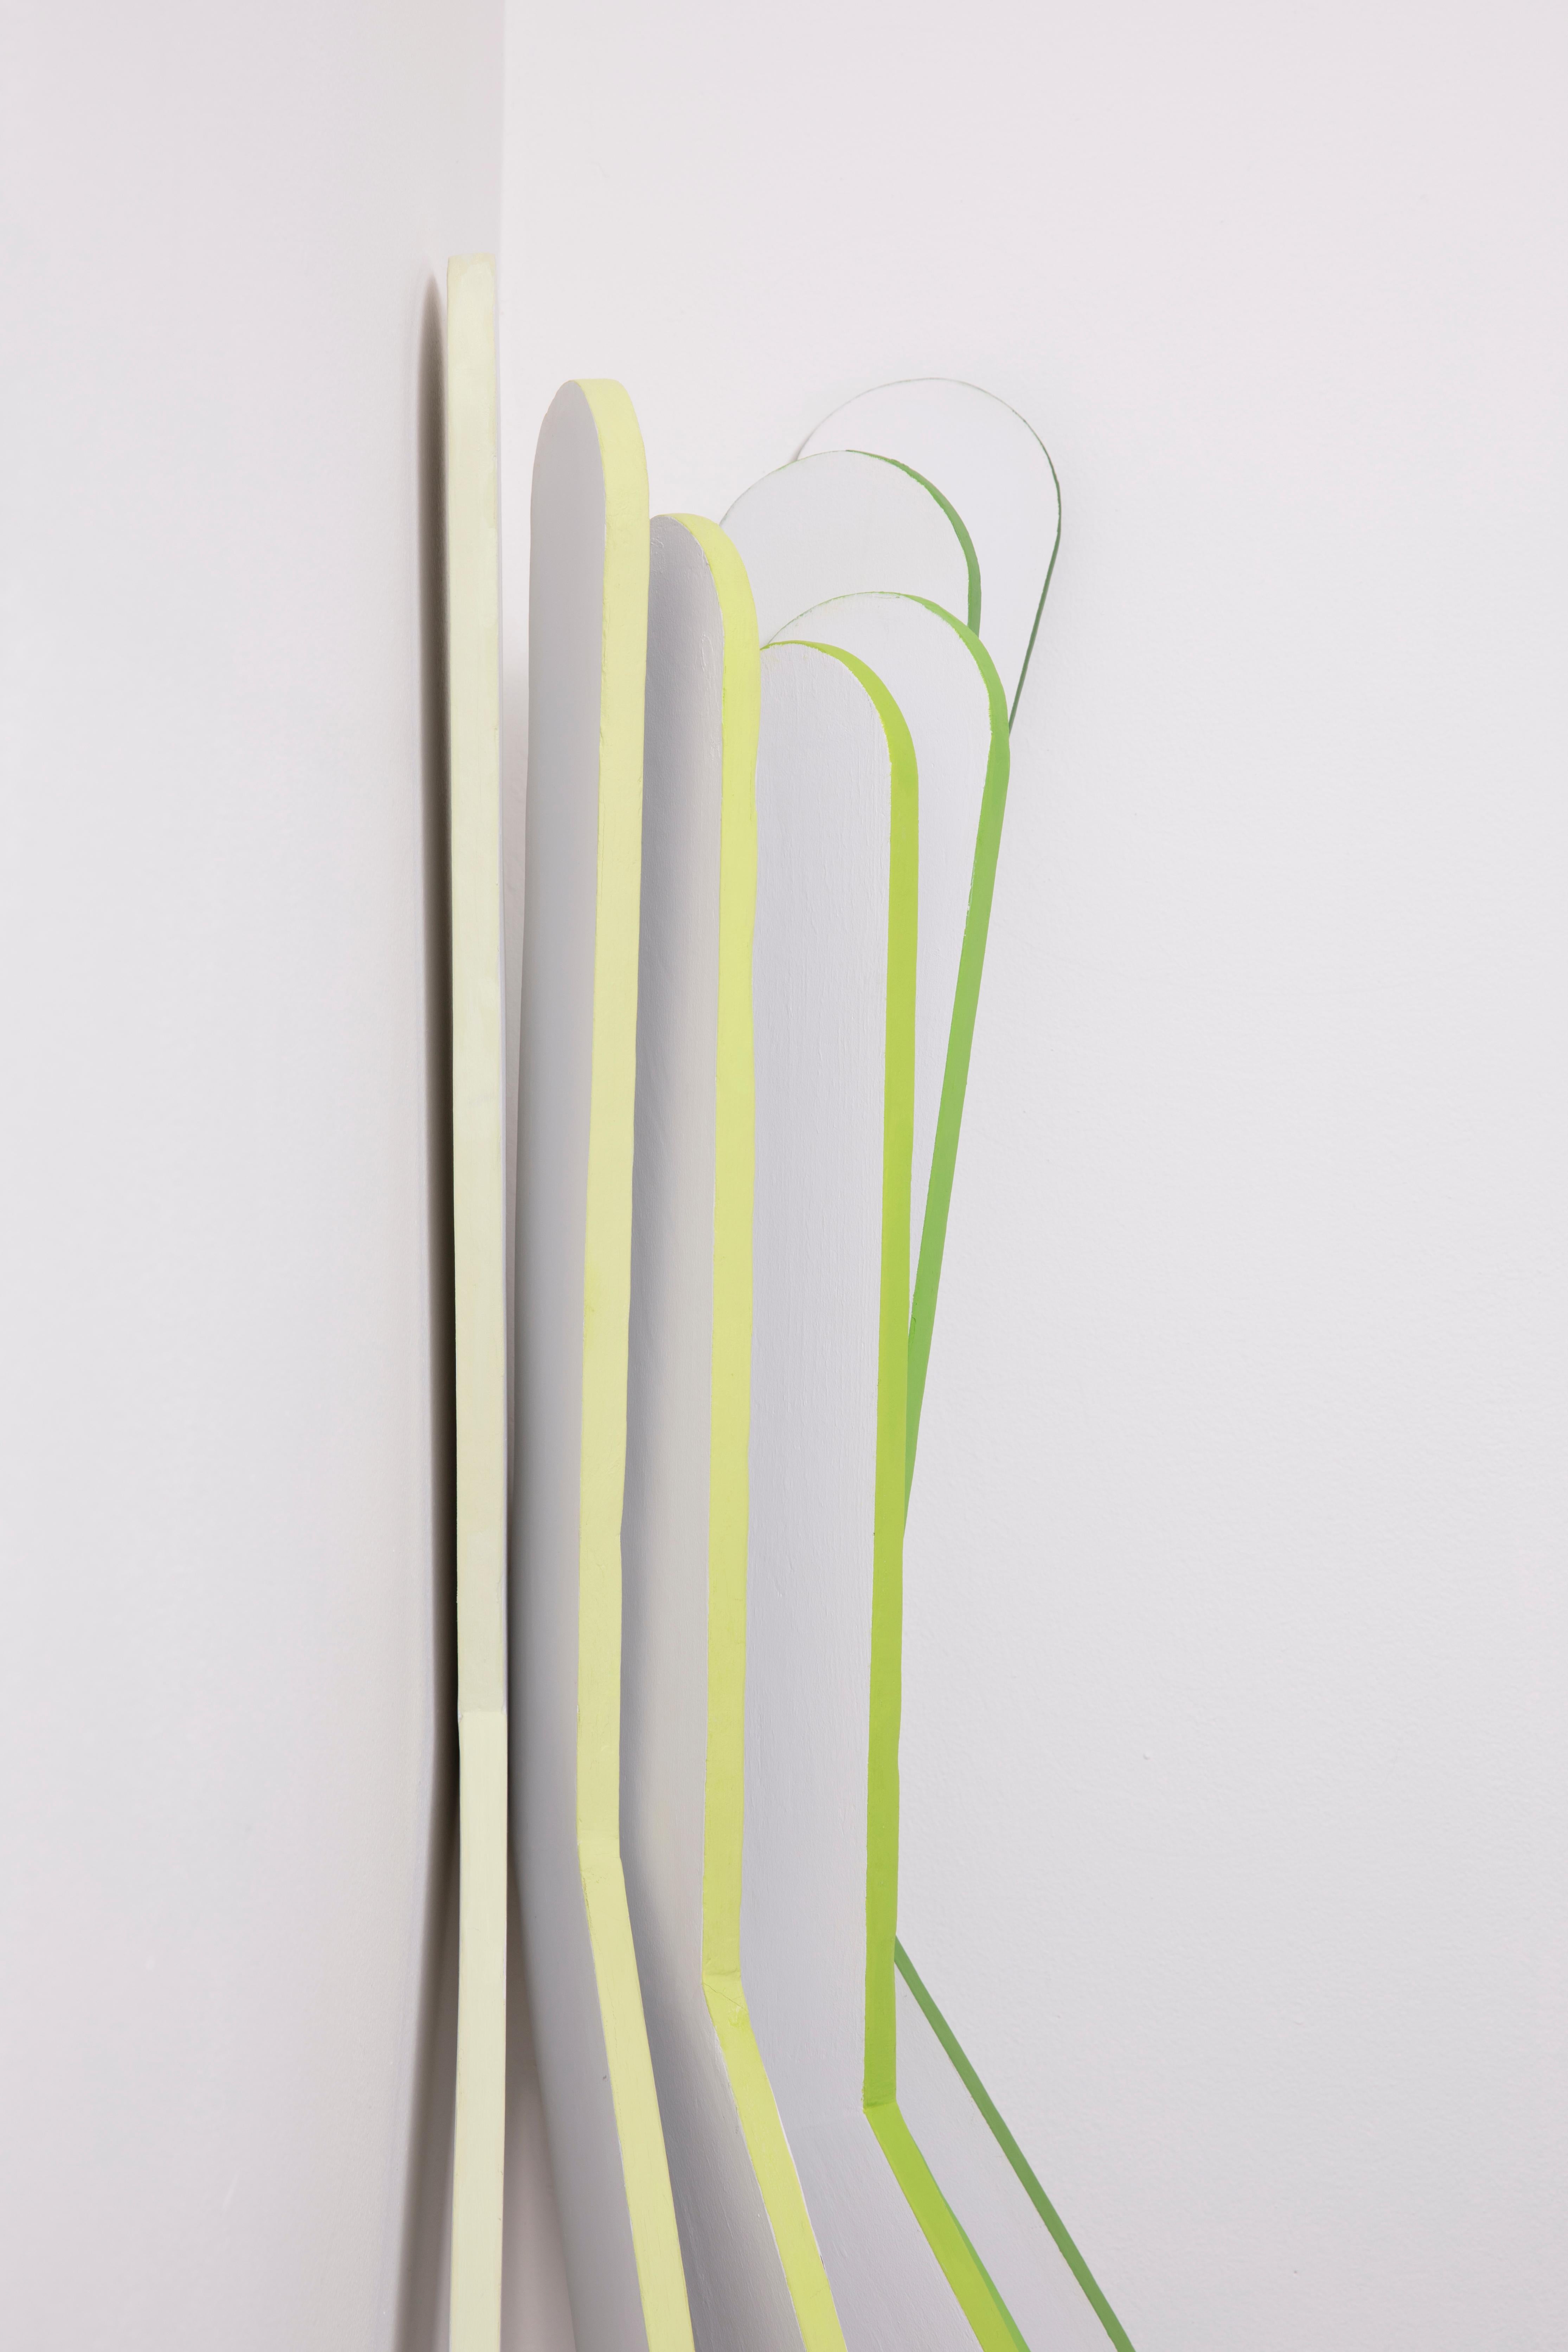 This wall hanging s sculpture is part of a series titled Soma. Since her last solo exhibition at Channel to Channel in July of 2020, she has been creating a new series of highly anticipated work. As the title suggests, the painted sculptures in this